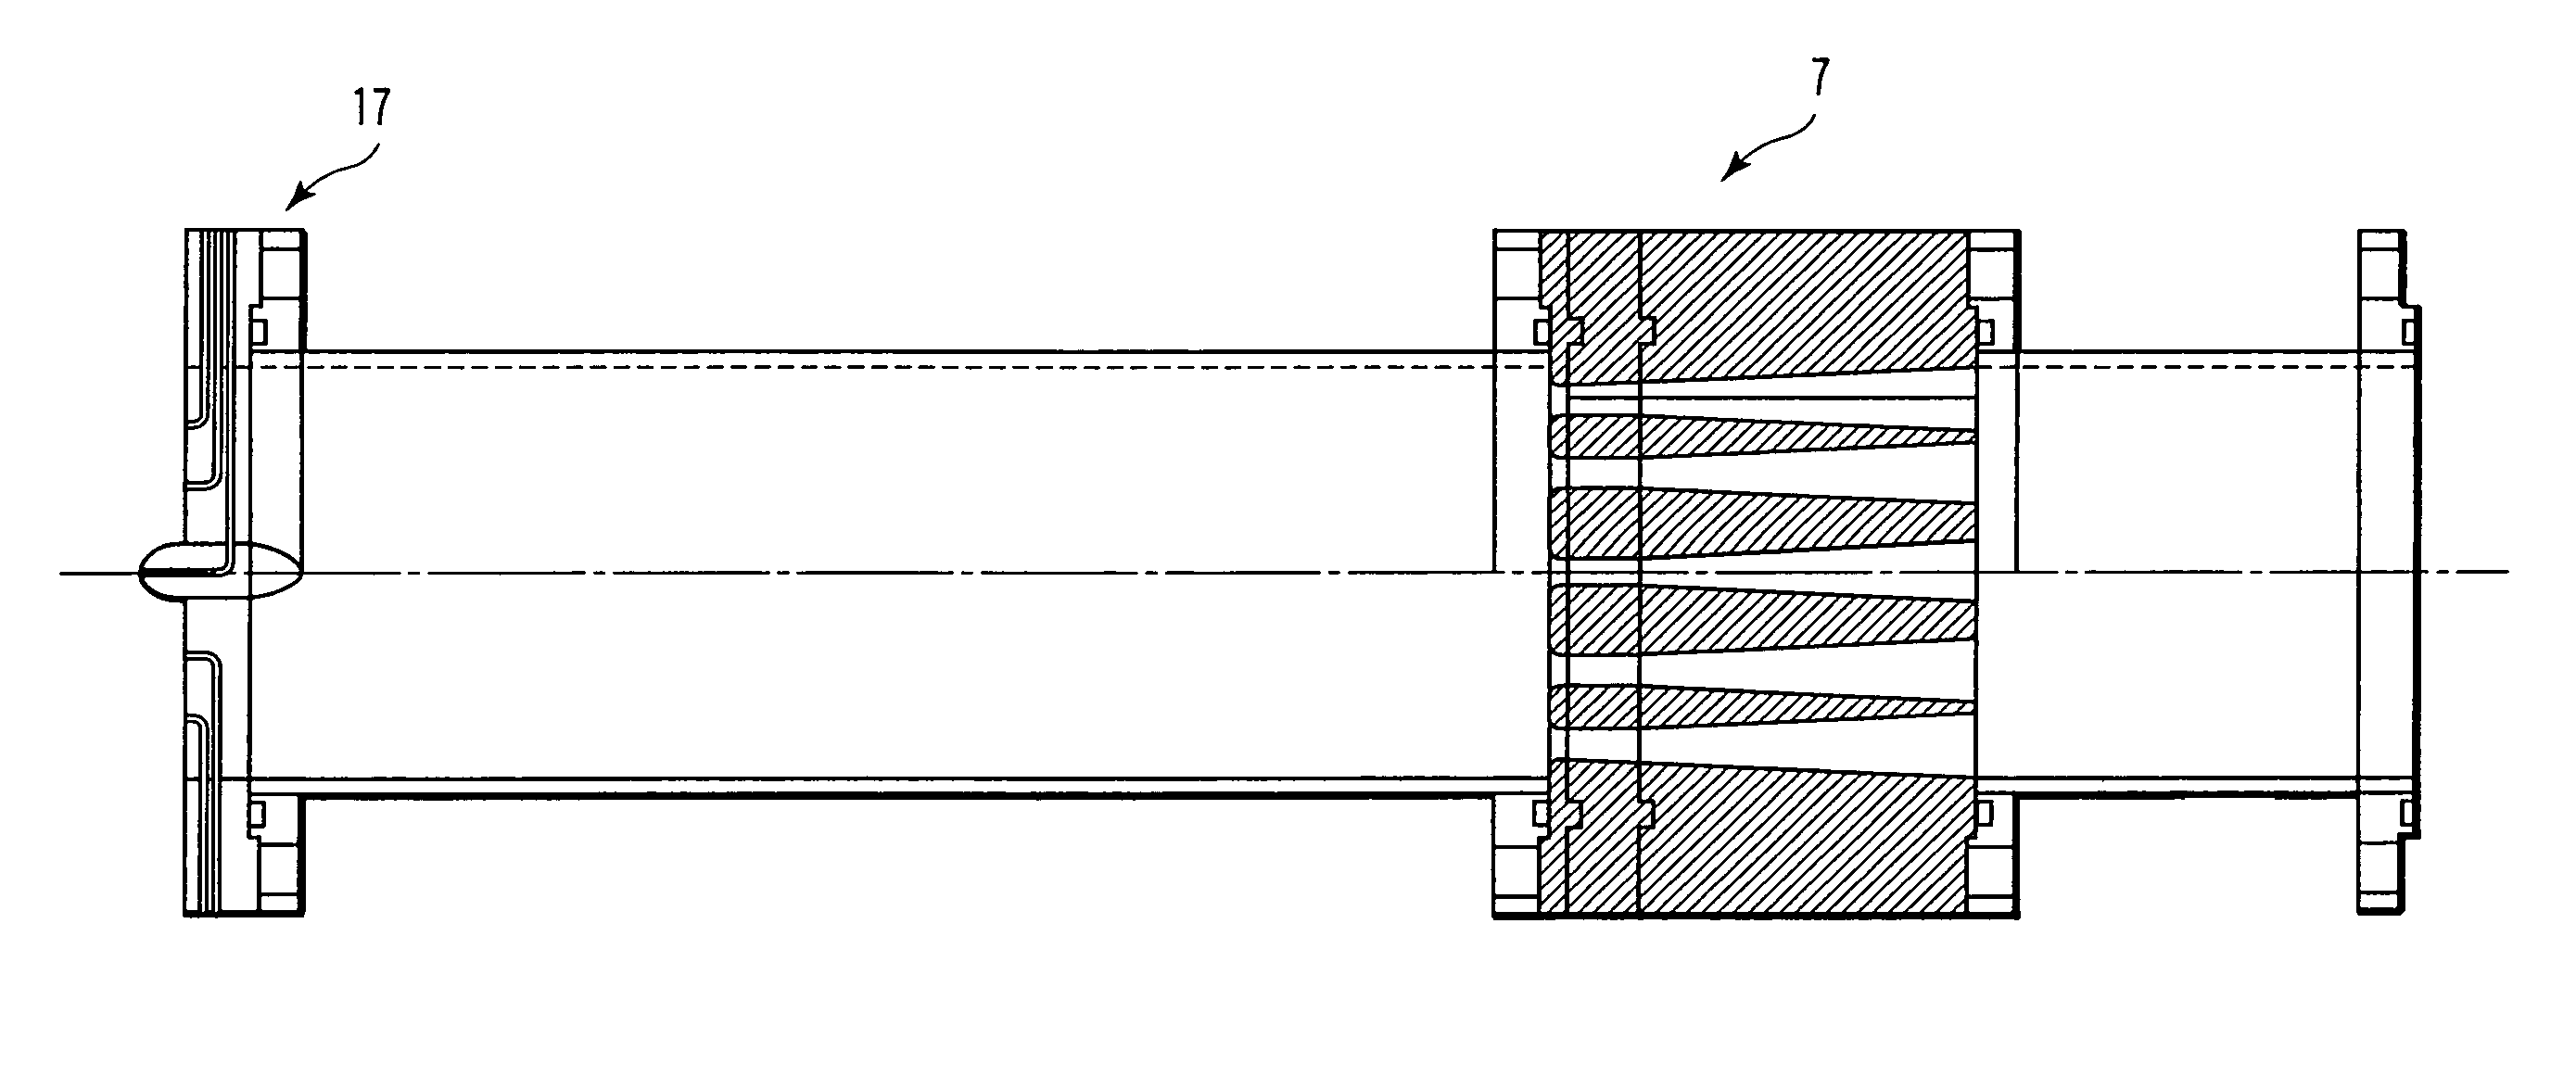 Apparatus for treating ballast water and method for treating ballast water